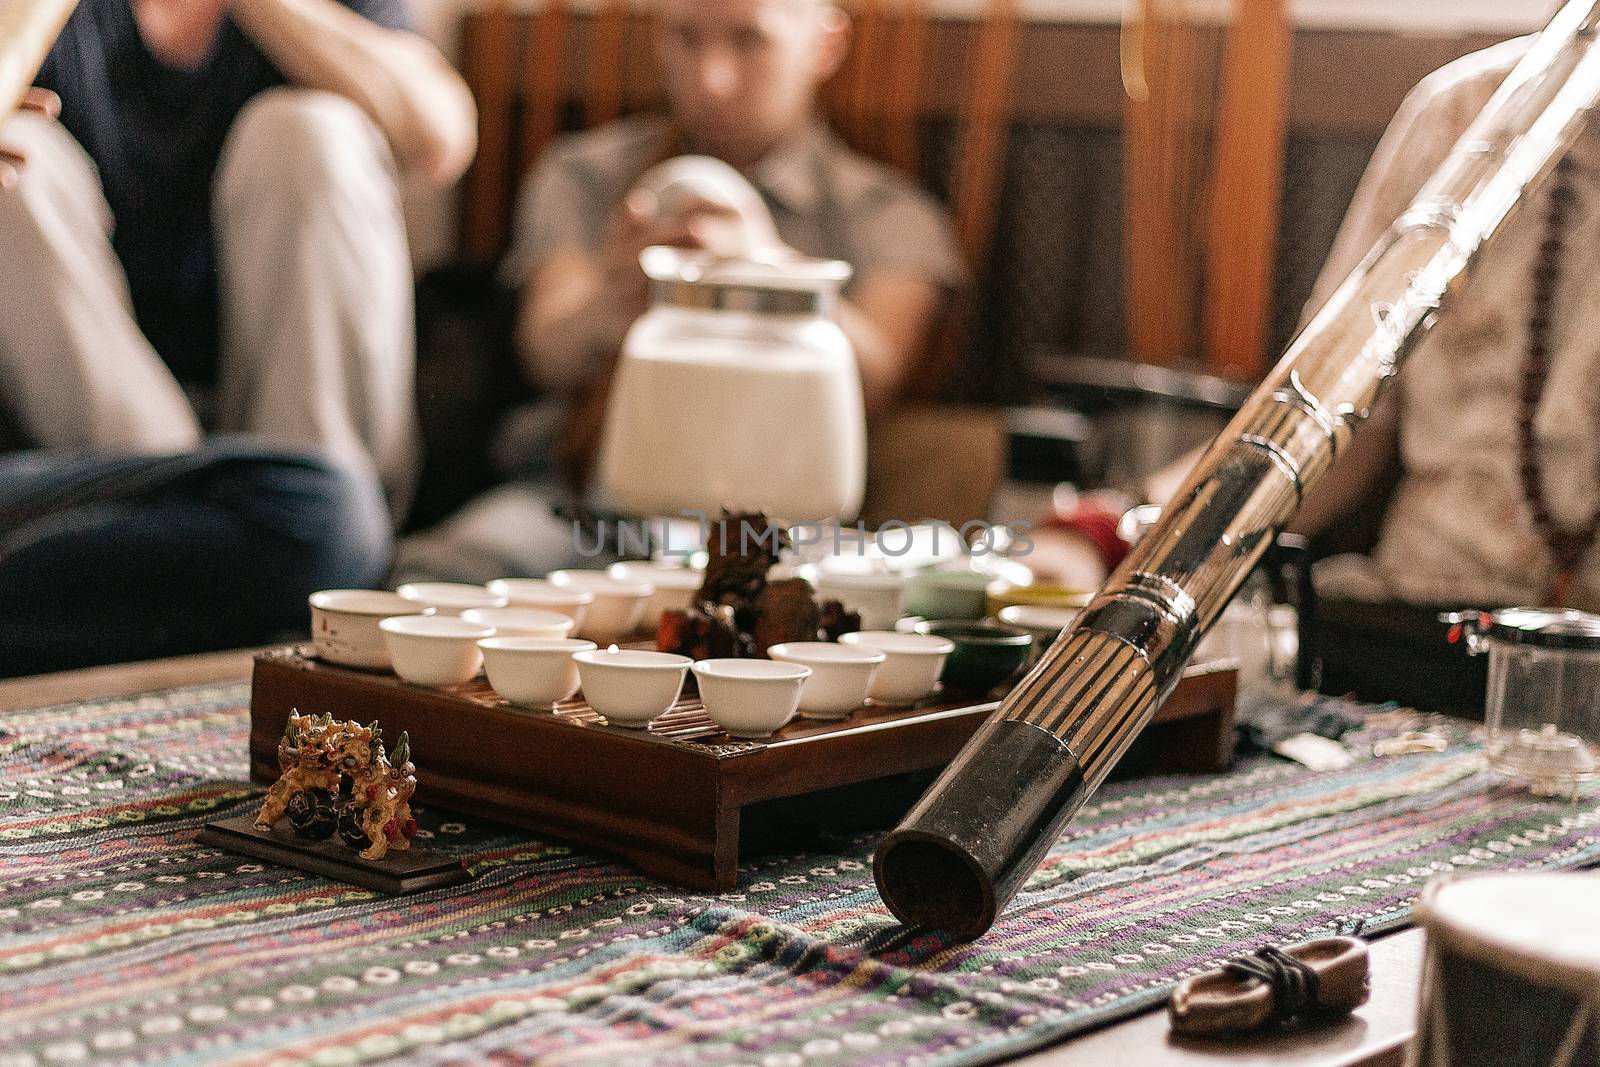 the tea ceremony is conducted by a tea master. tea party in the style of boho, hippie. tea cups on a special wooden coffee table. Preparation of masala tea. Tea is prepared on the fire. a didgeridoo. by Pirlik